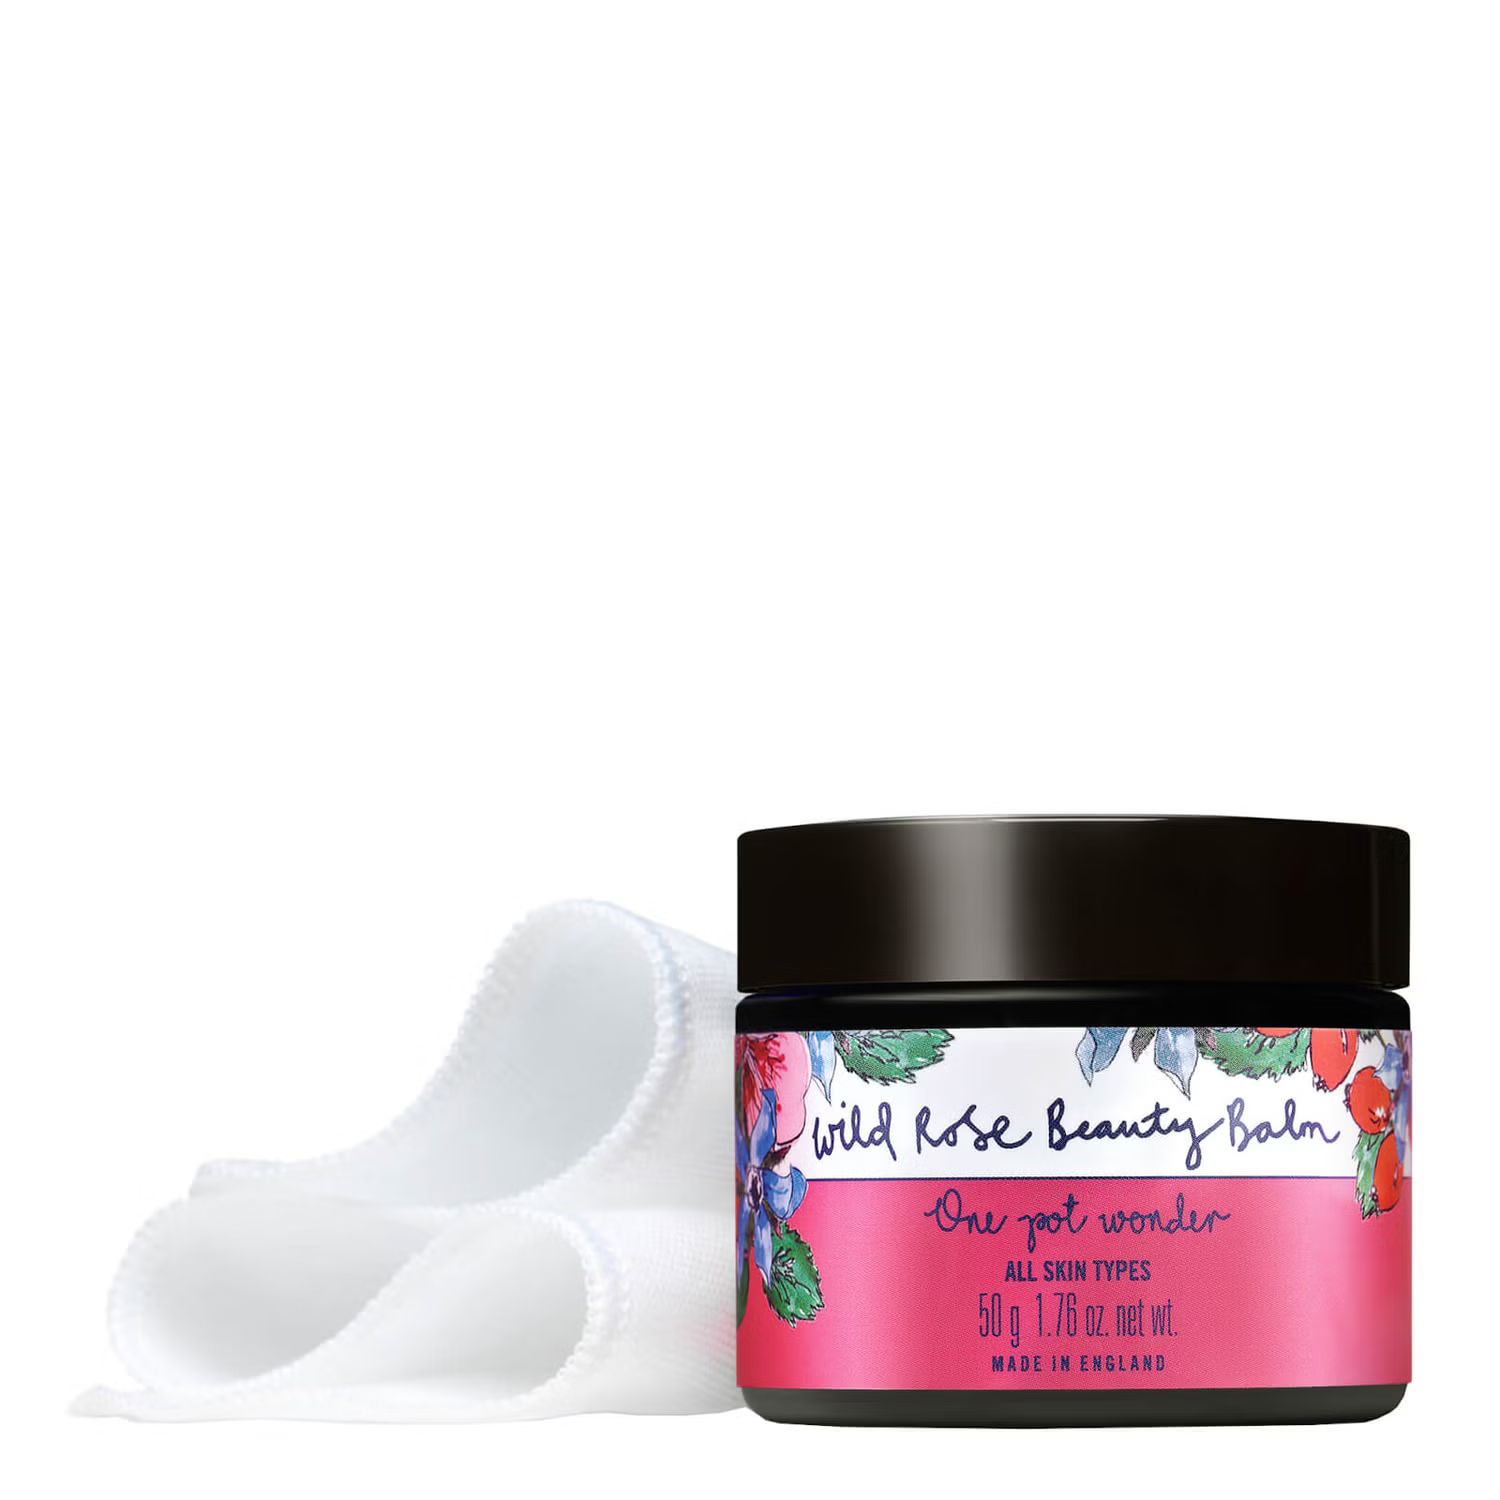 Neal's Yard Remedies Wild Rose Beauty Balm 50g - Includes cloth | Look Fantastic (UK)